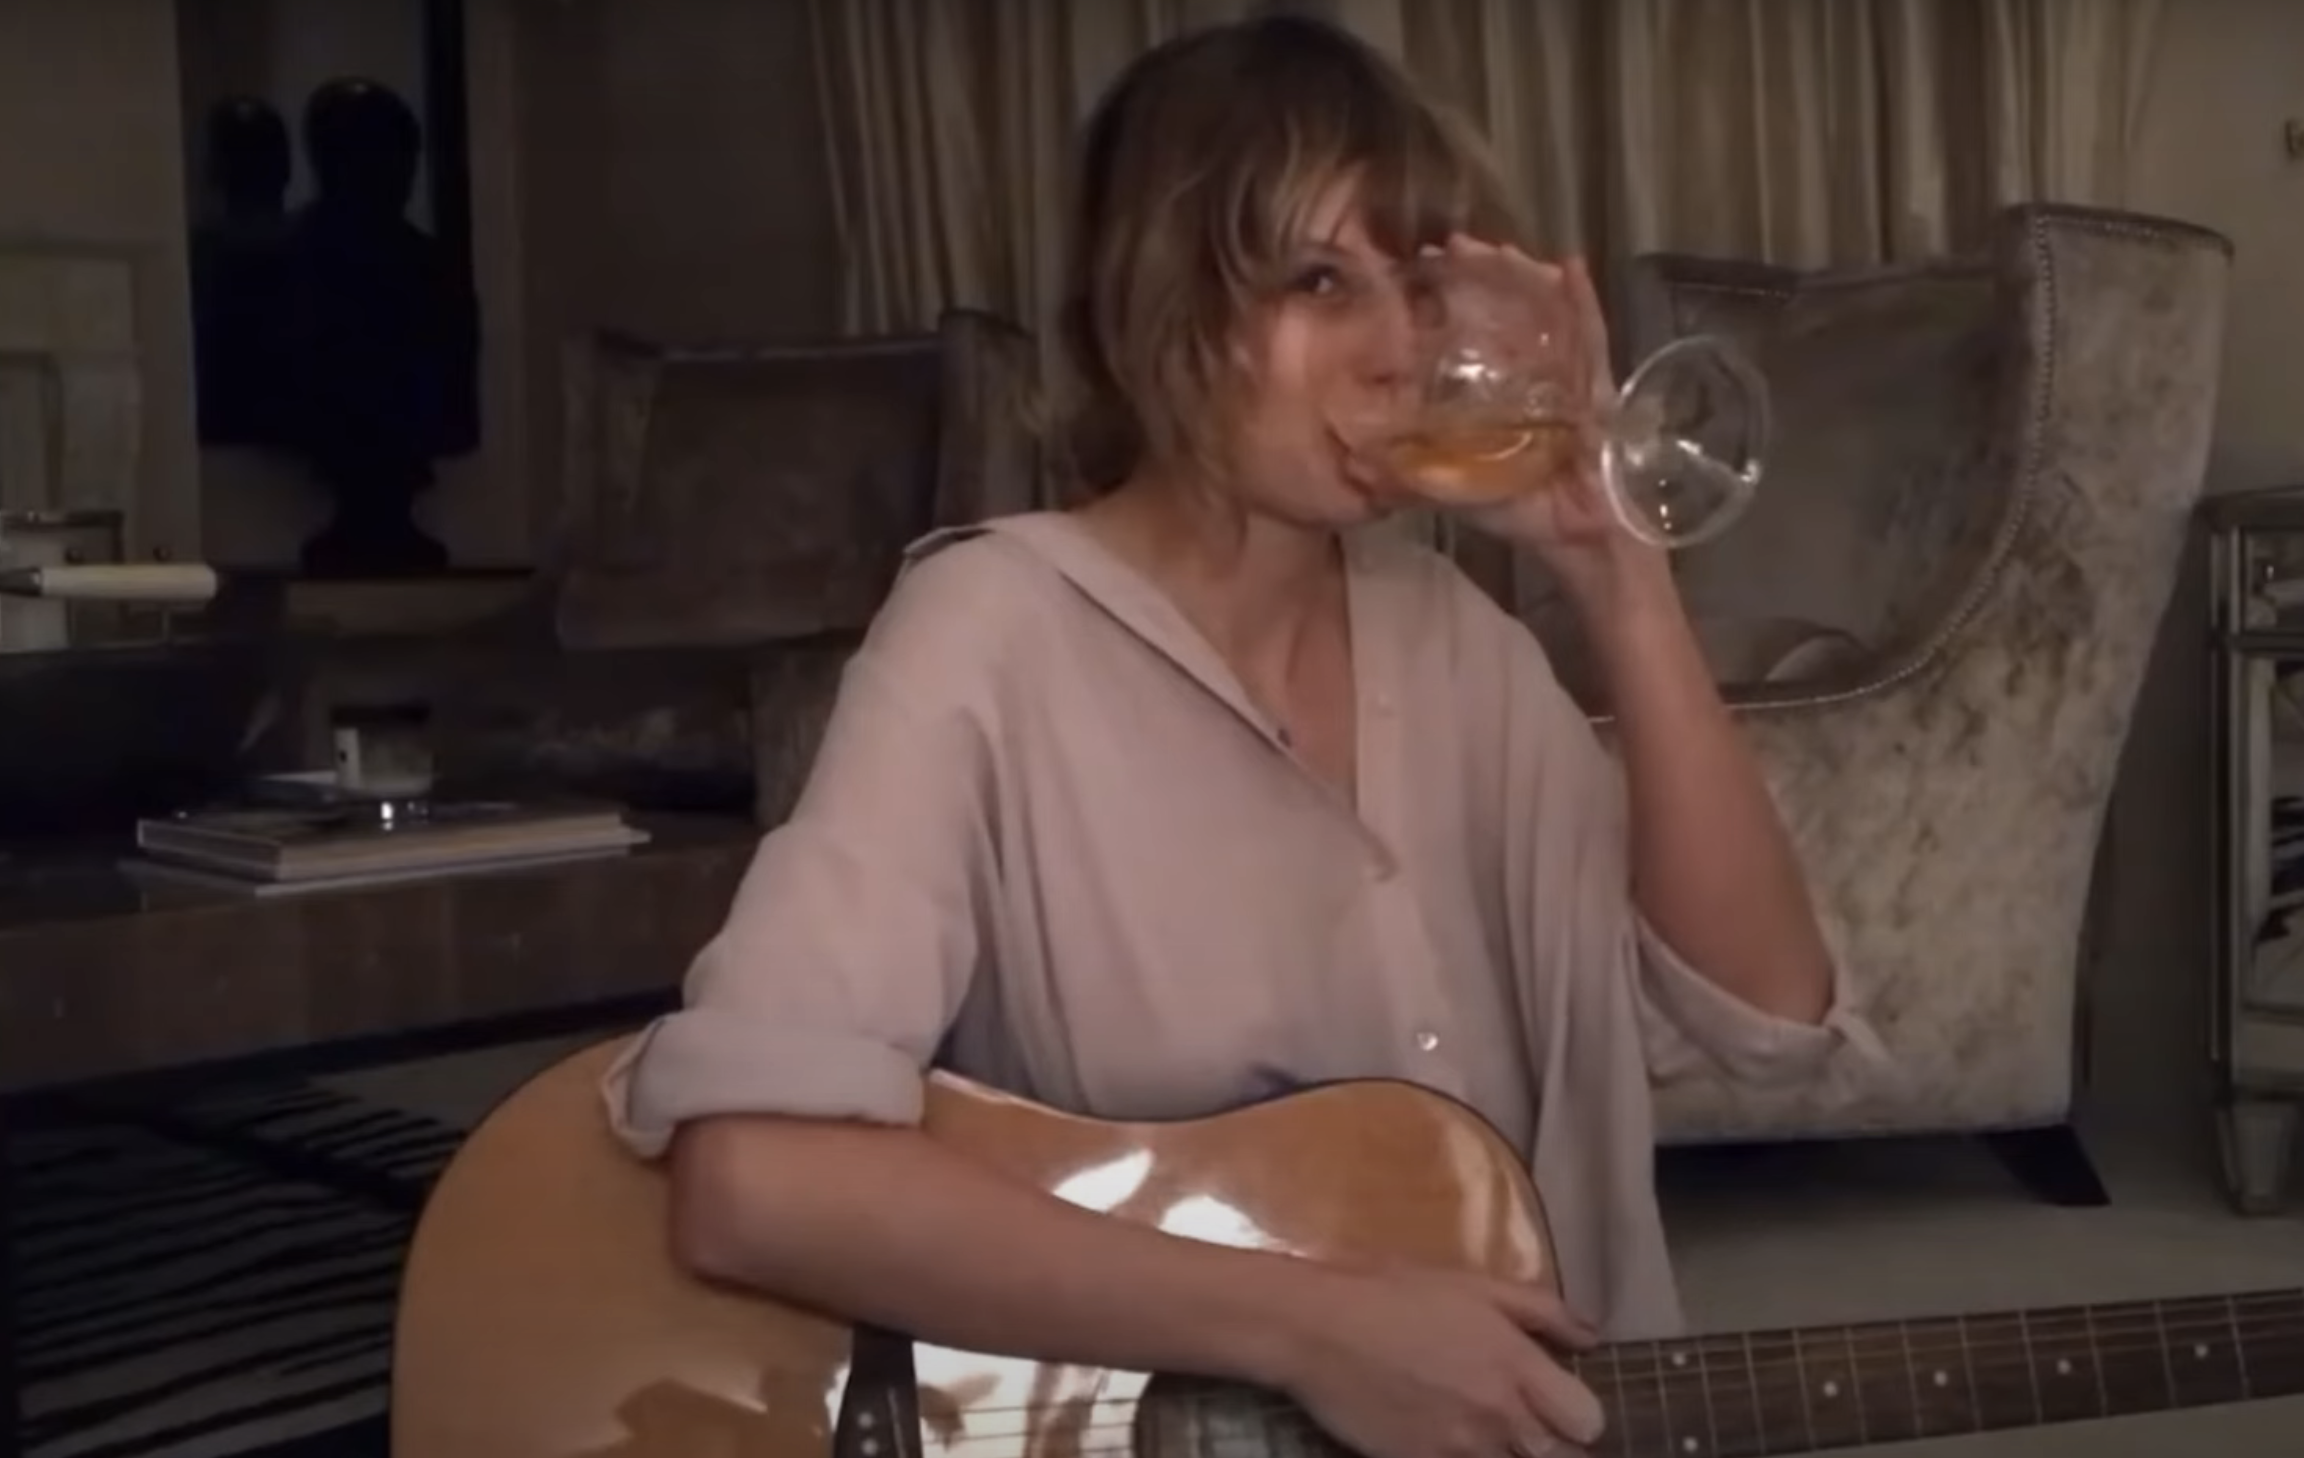 Closeup of Taylor Swift sipping wine from a glass